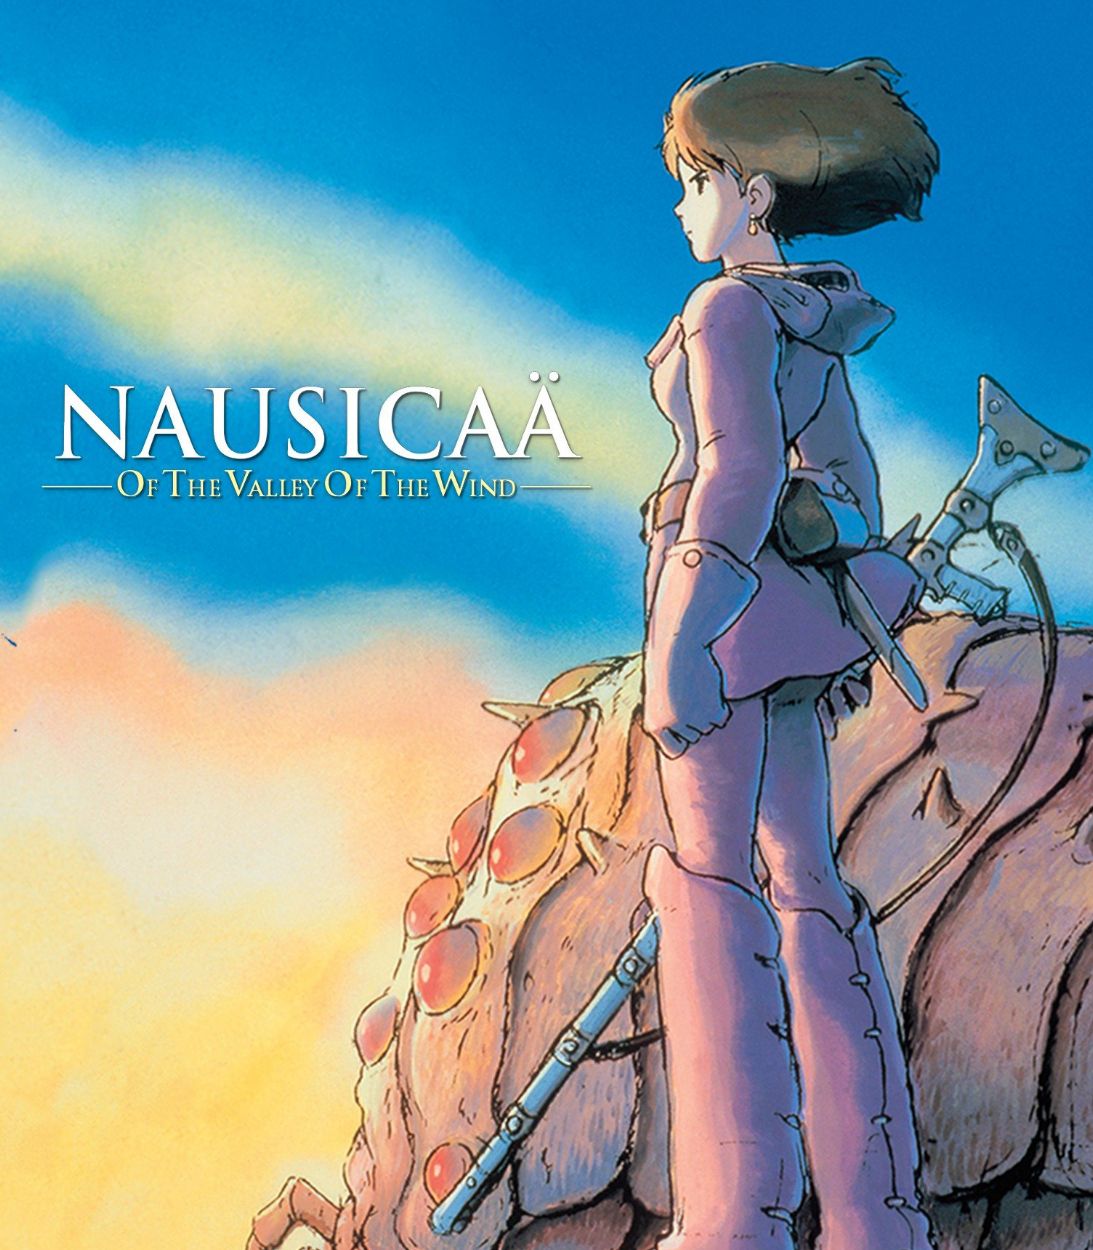 The poster of Nausicaa: Of The Valley Of The Wind